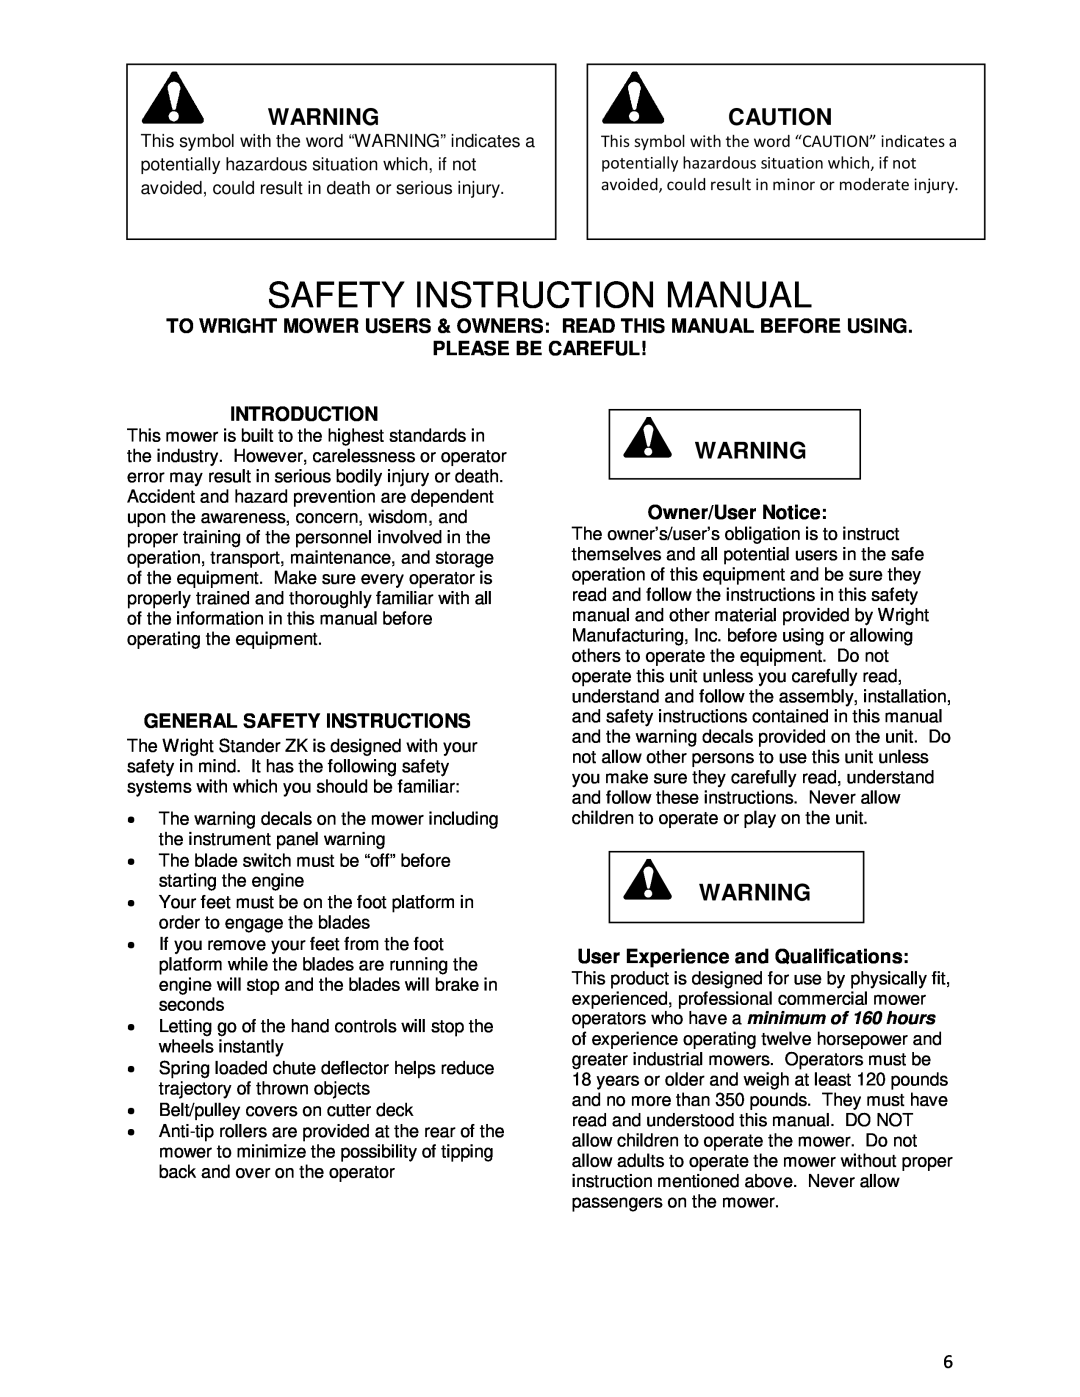 Wright Manufacturing 43181 To Wright Mower Users & Owners Read This Manual Before Using, Please Be Careful, Introduction 